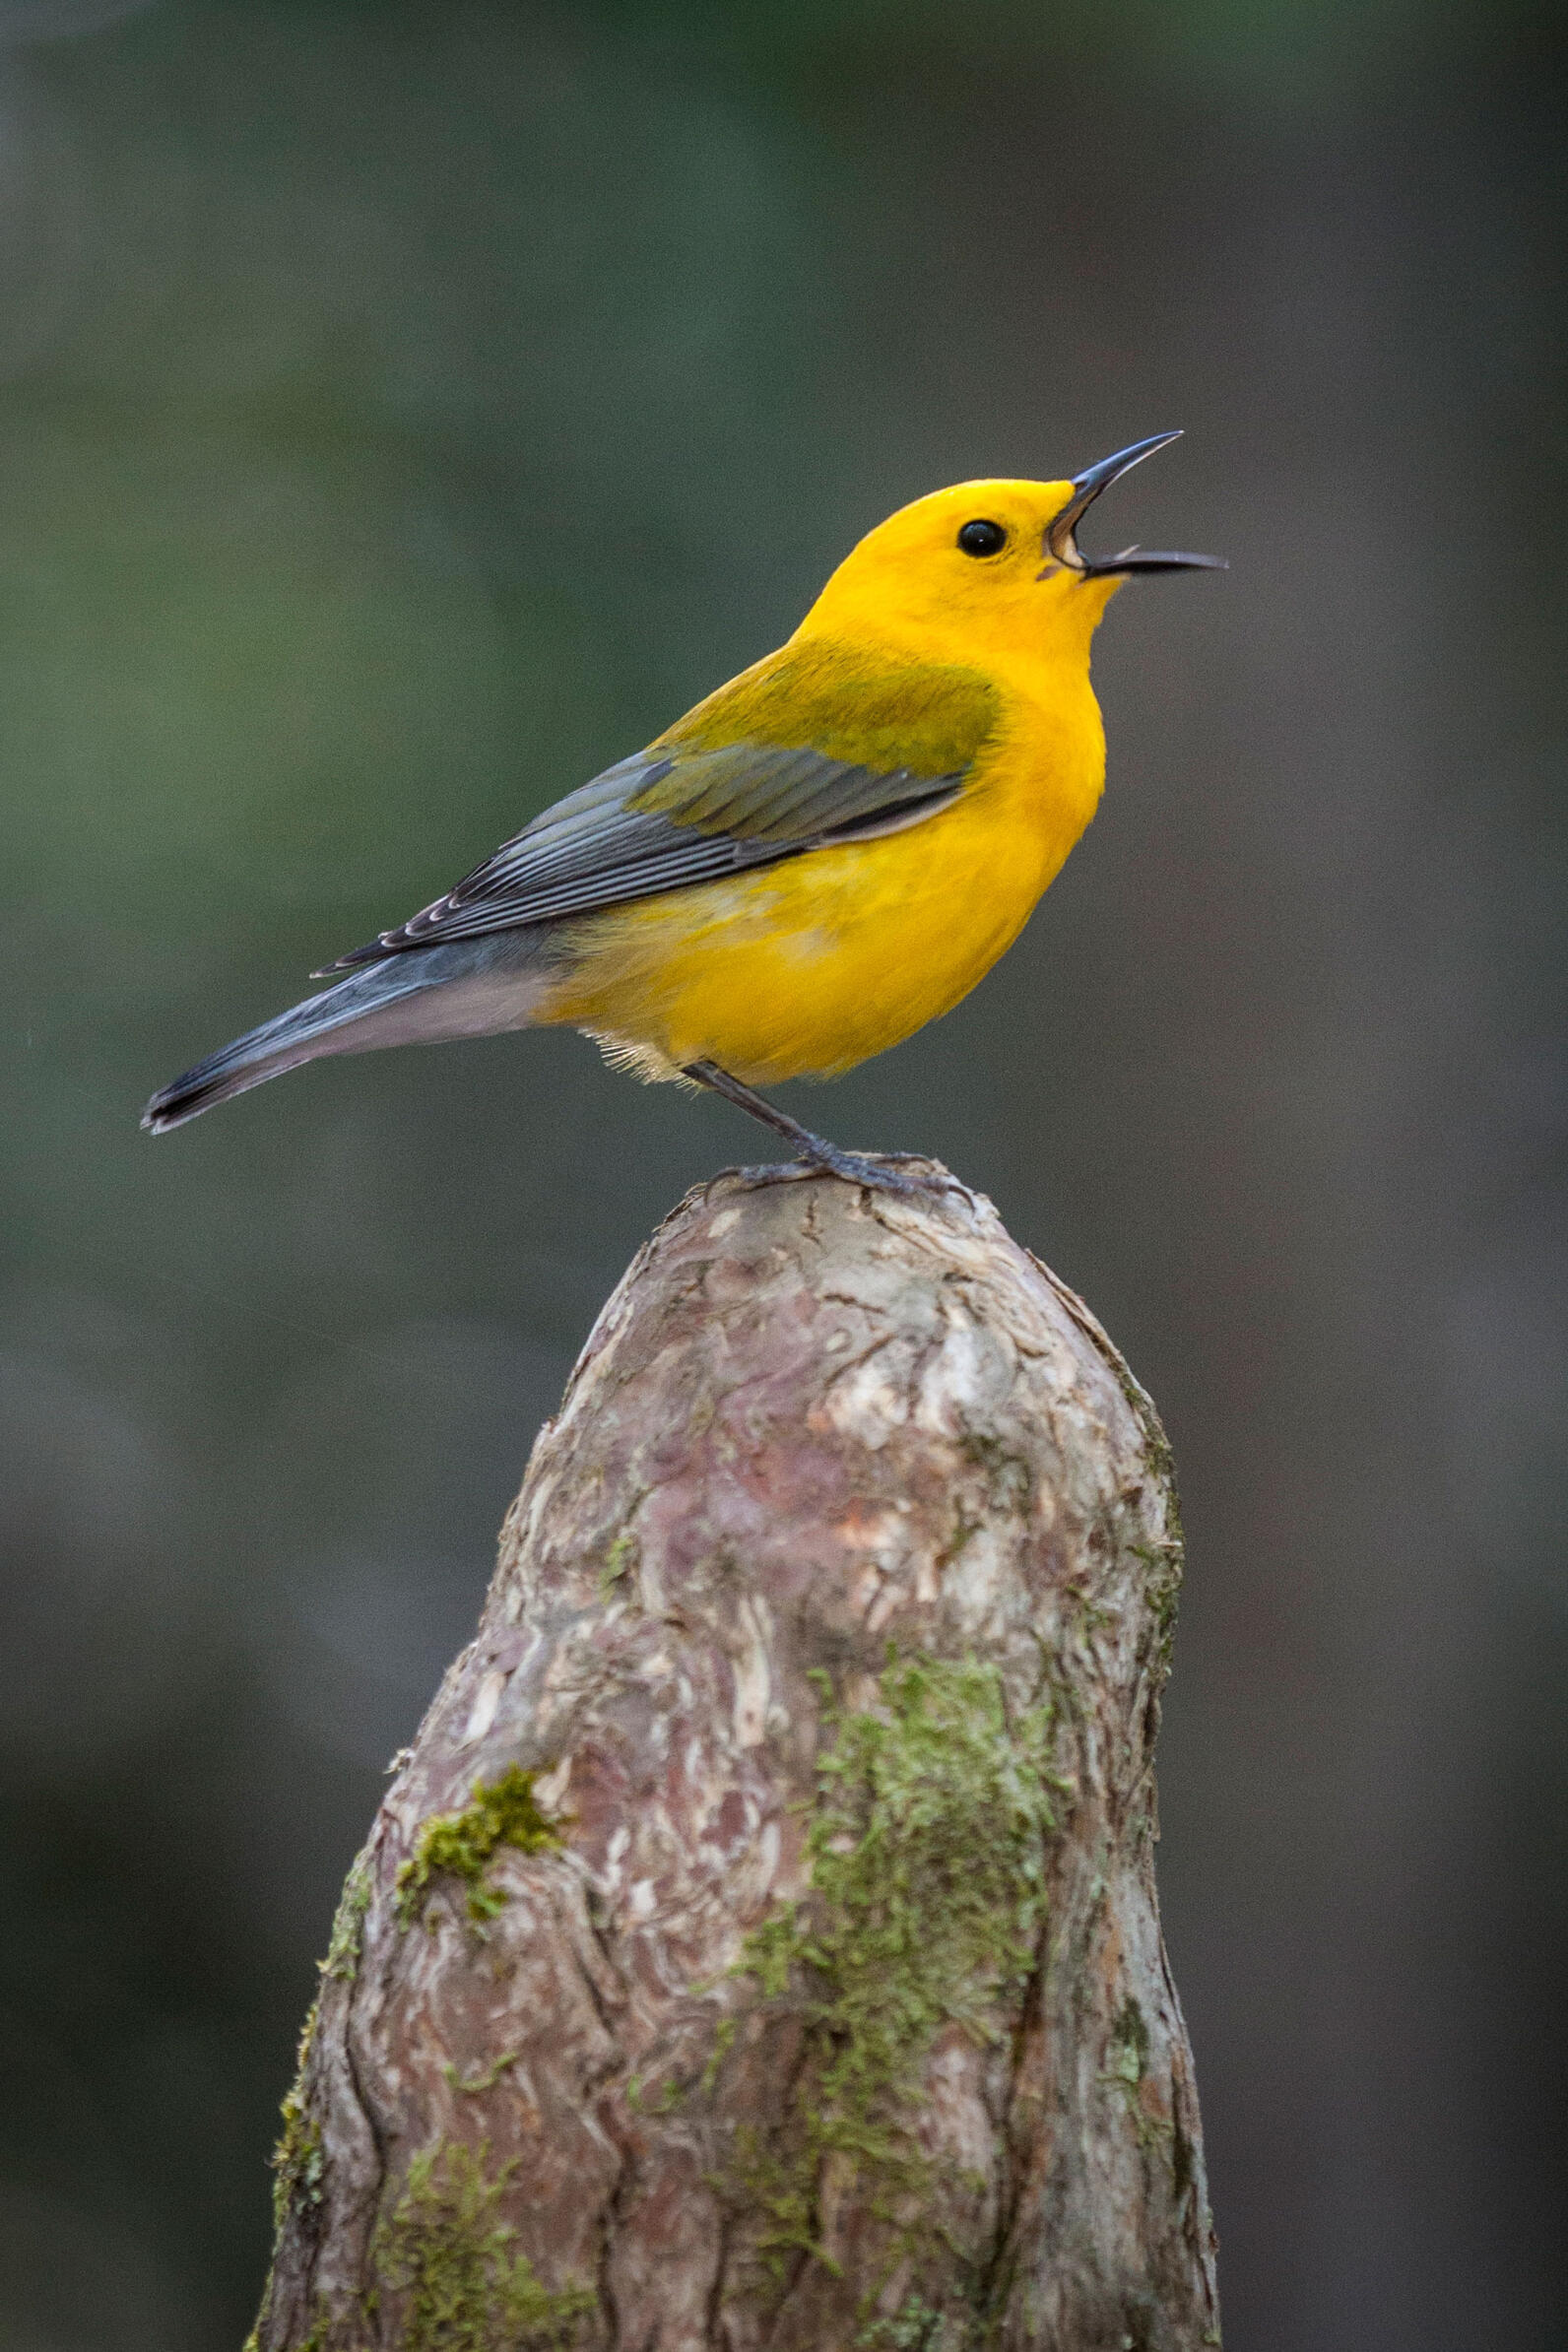 Prothonotary Warbler, or "swamp canary," singing, belting to the sky from a Bad Cypress knee. 